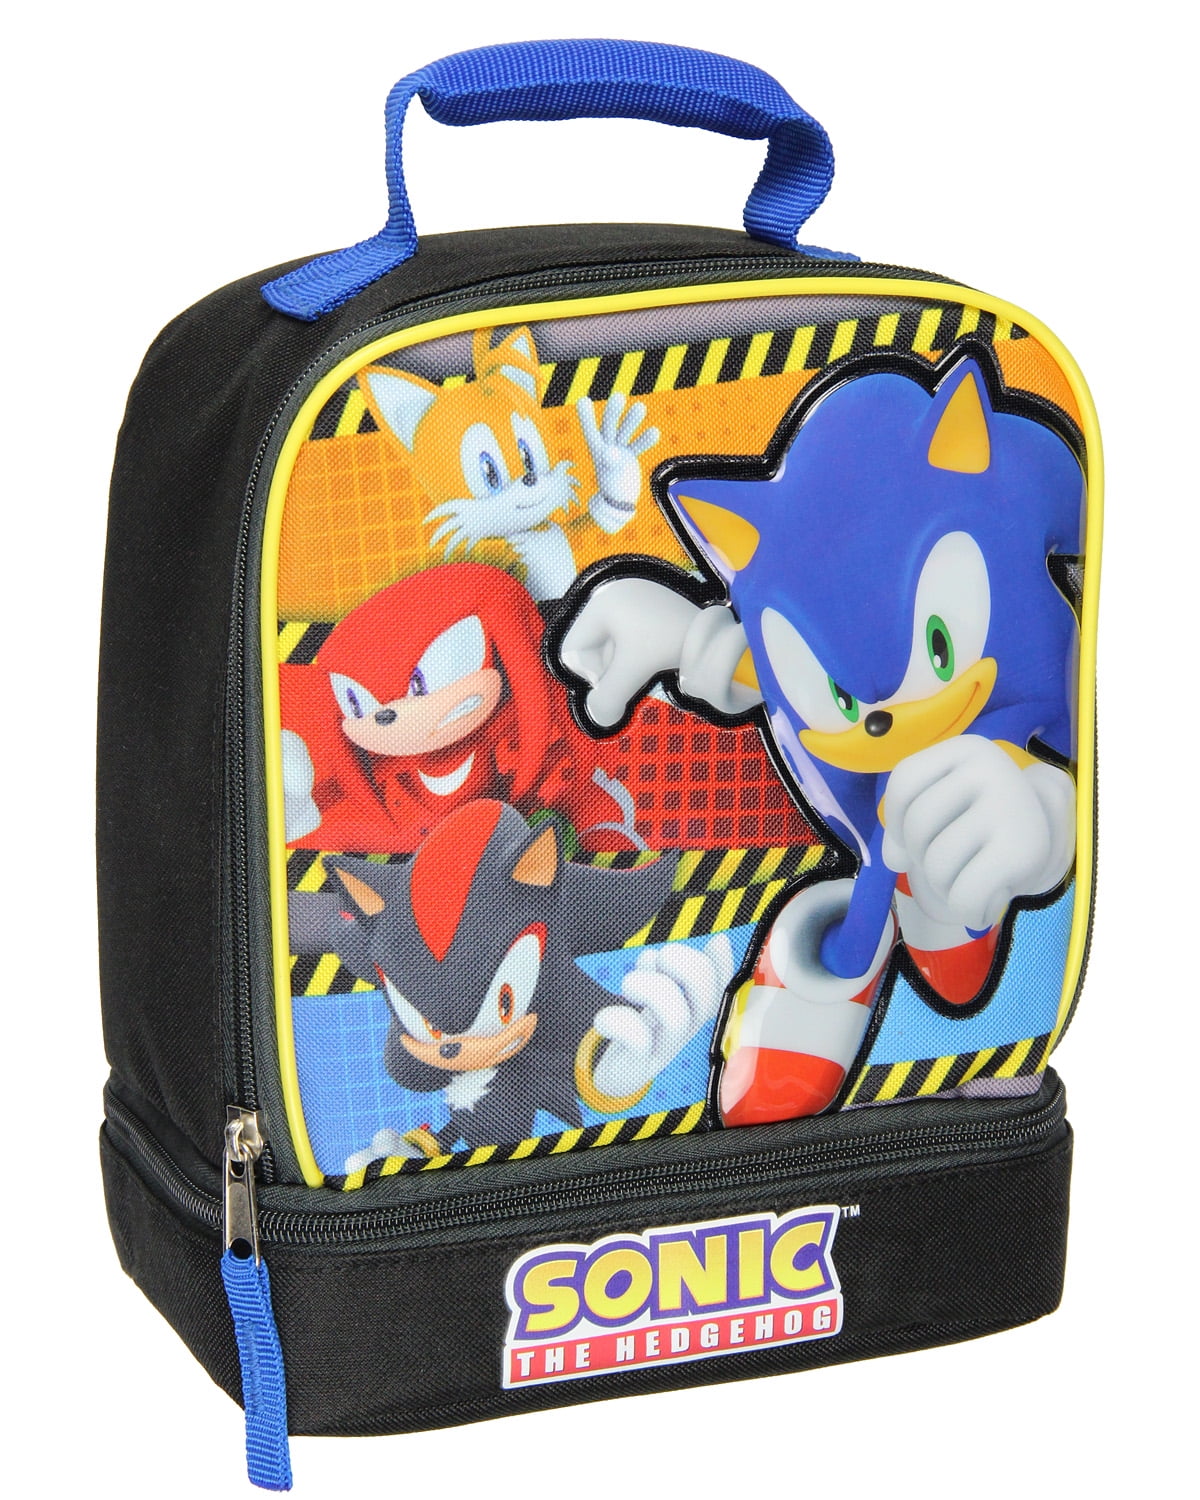 Sonic the Hedgehog Raised Face Dual Compartment Lunch Box Kit - Walmart.com